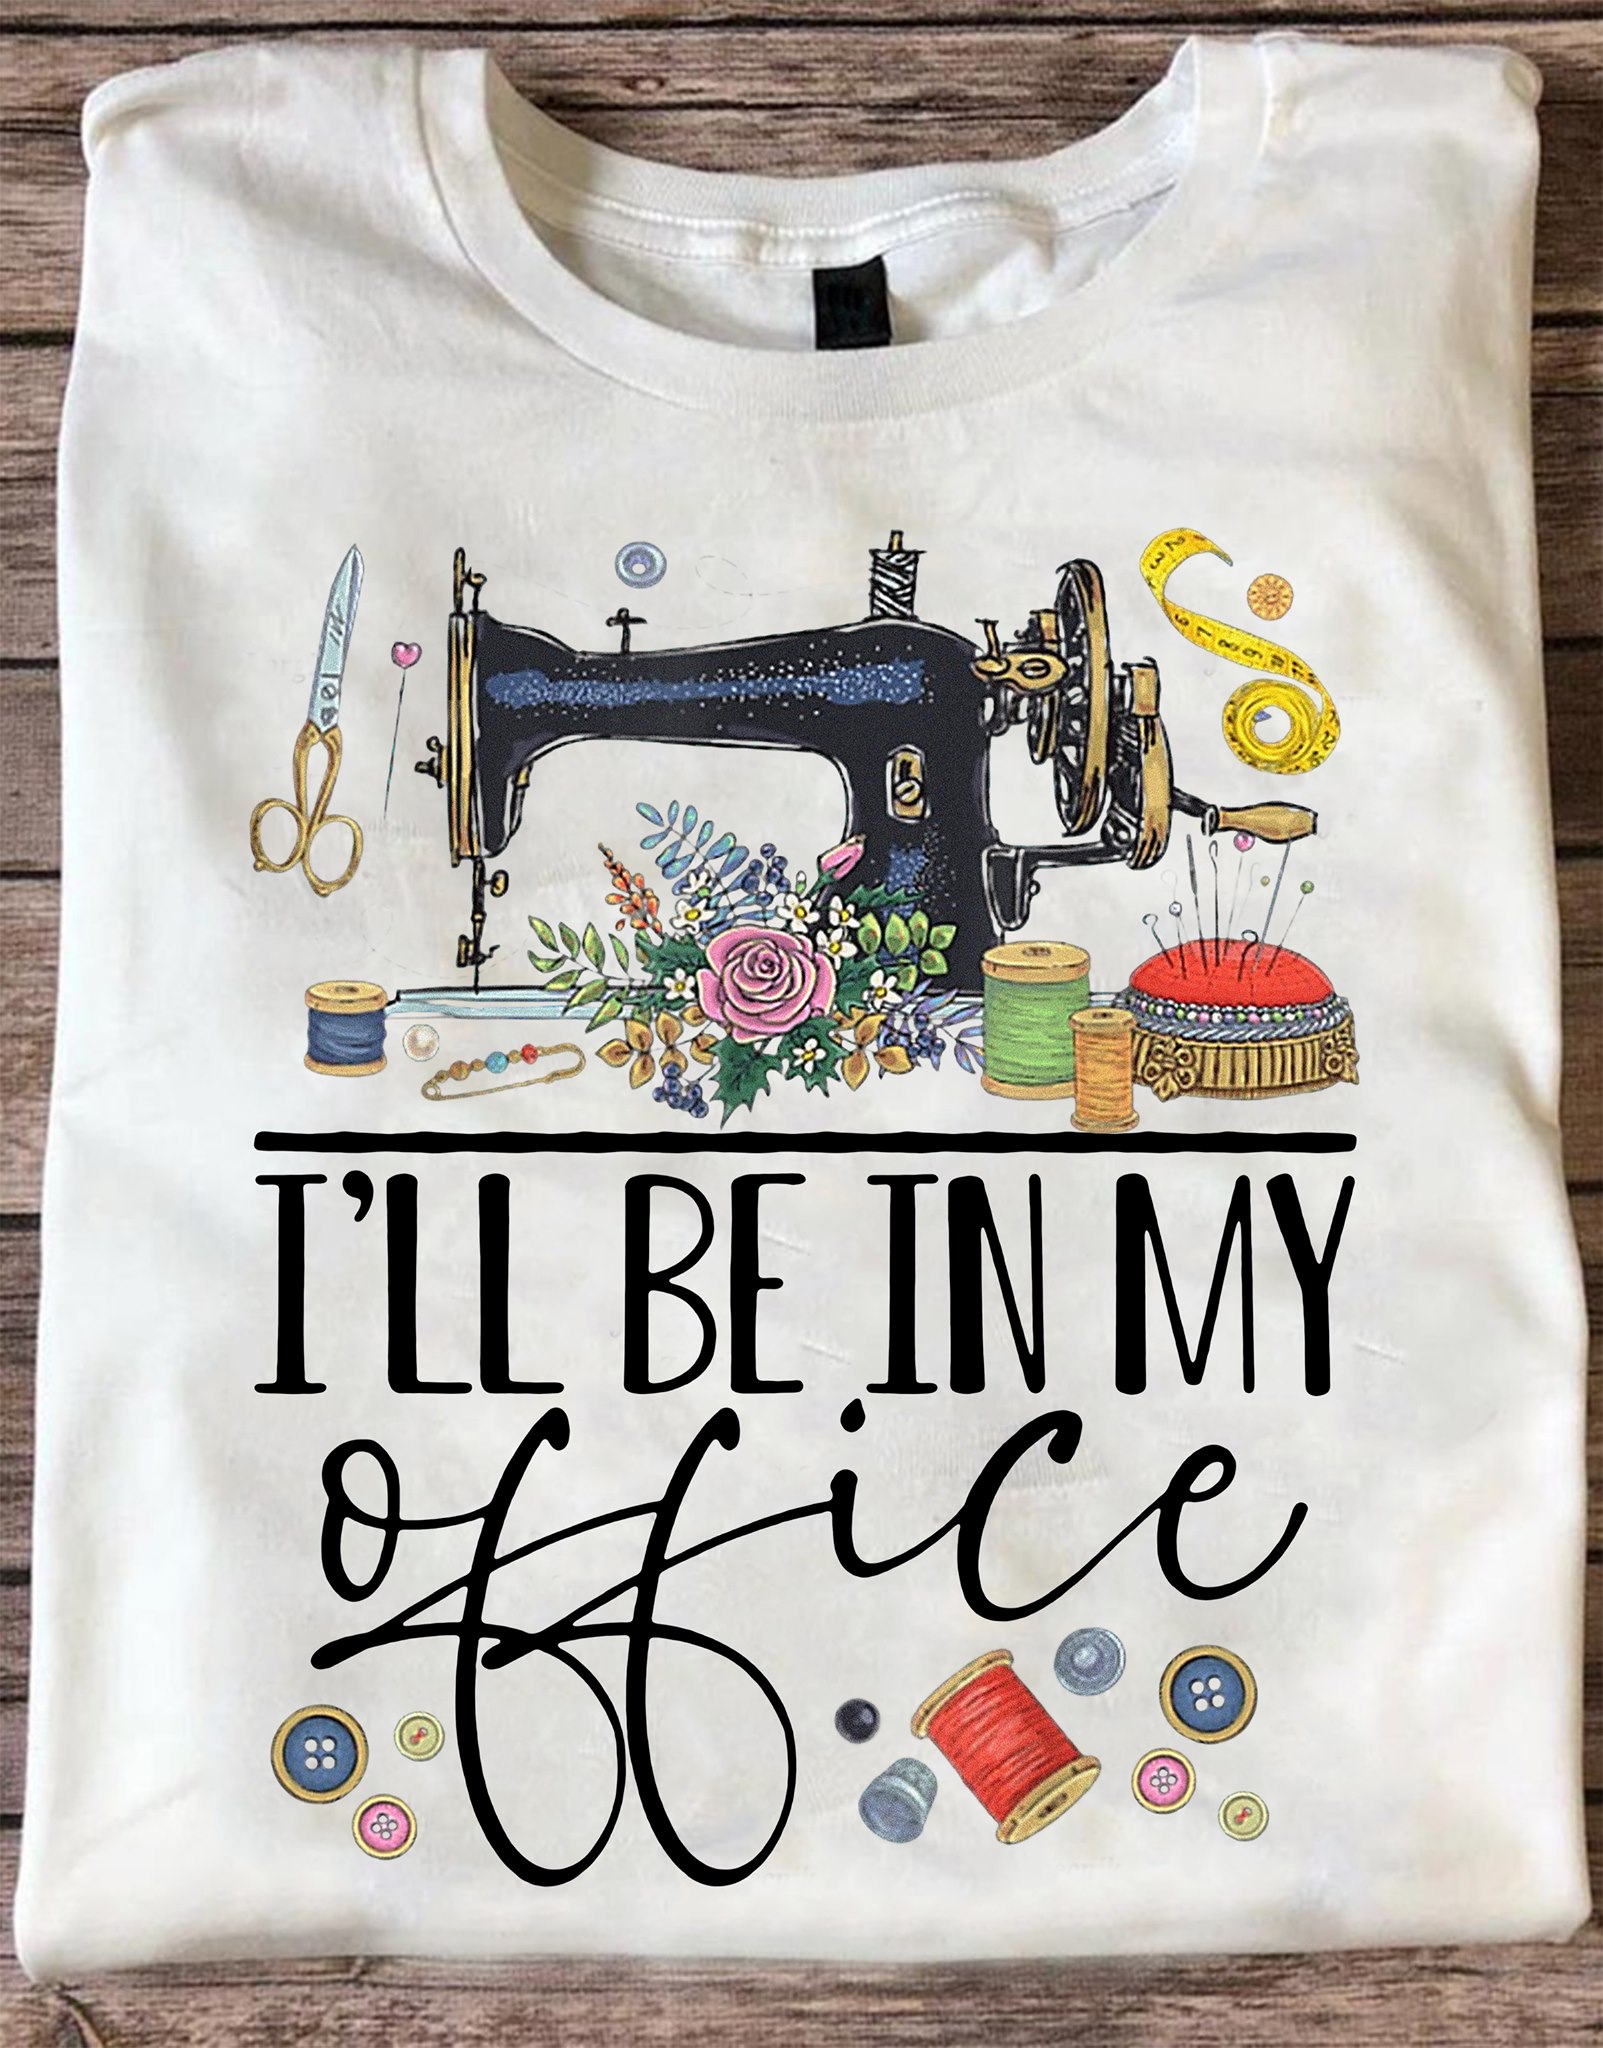 I'll be in my office - Sewing machine, love sewing